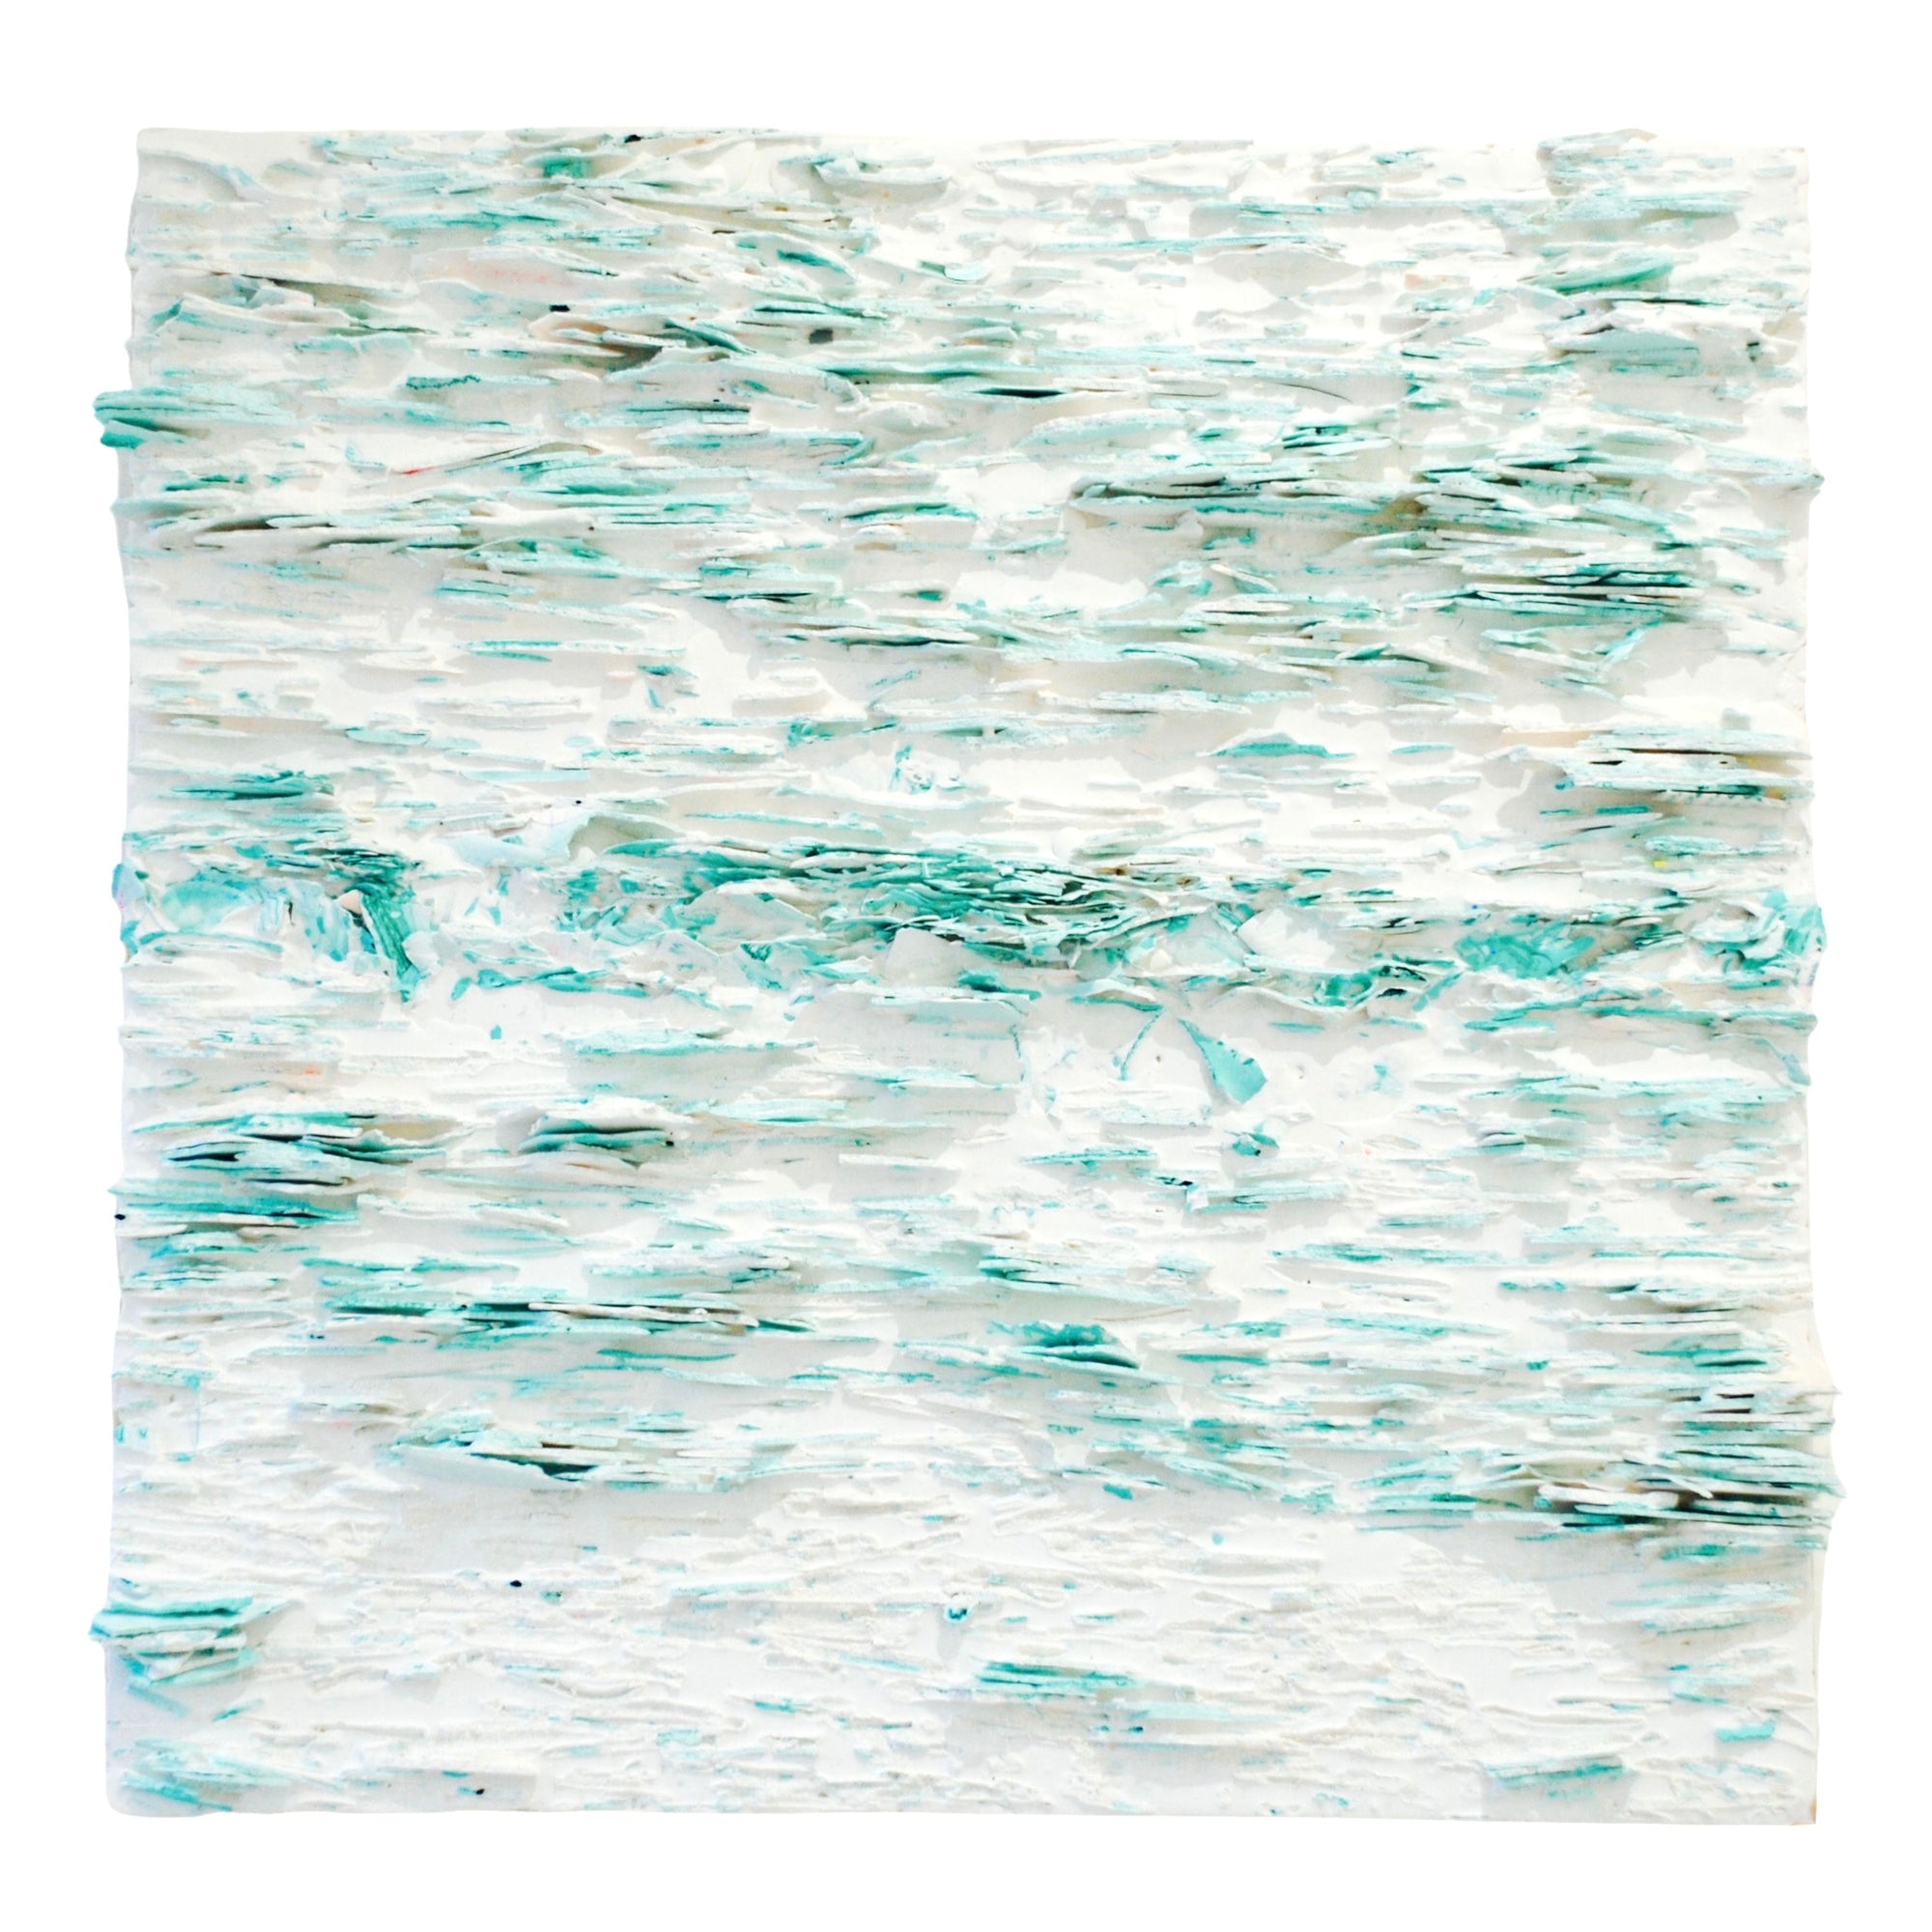 A textural abstract painting made from shards of turquoise jesmonite measuring 50cm x 50cm.    